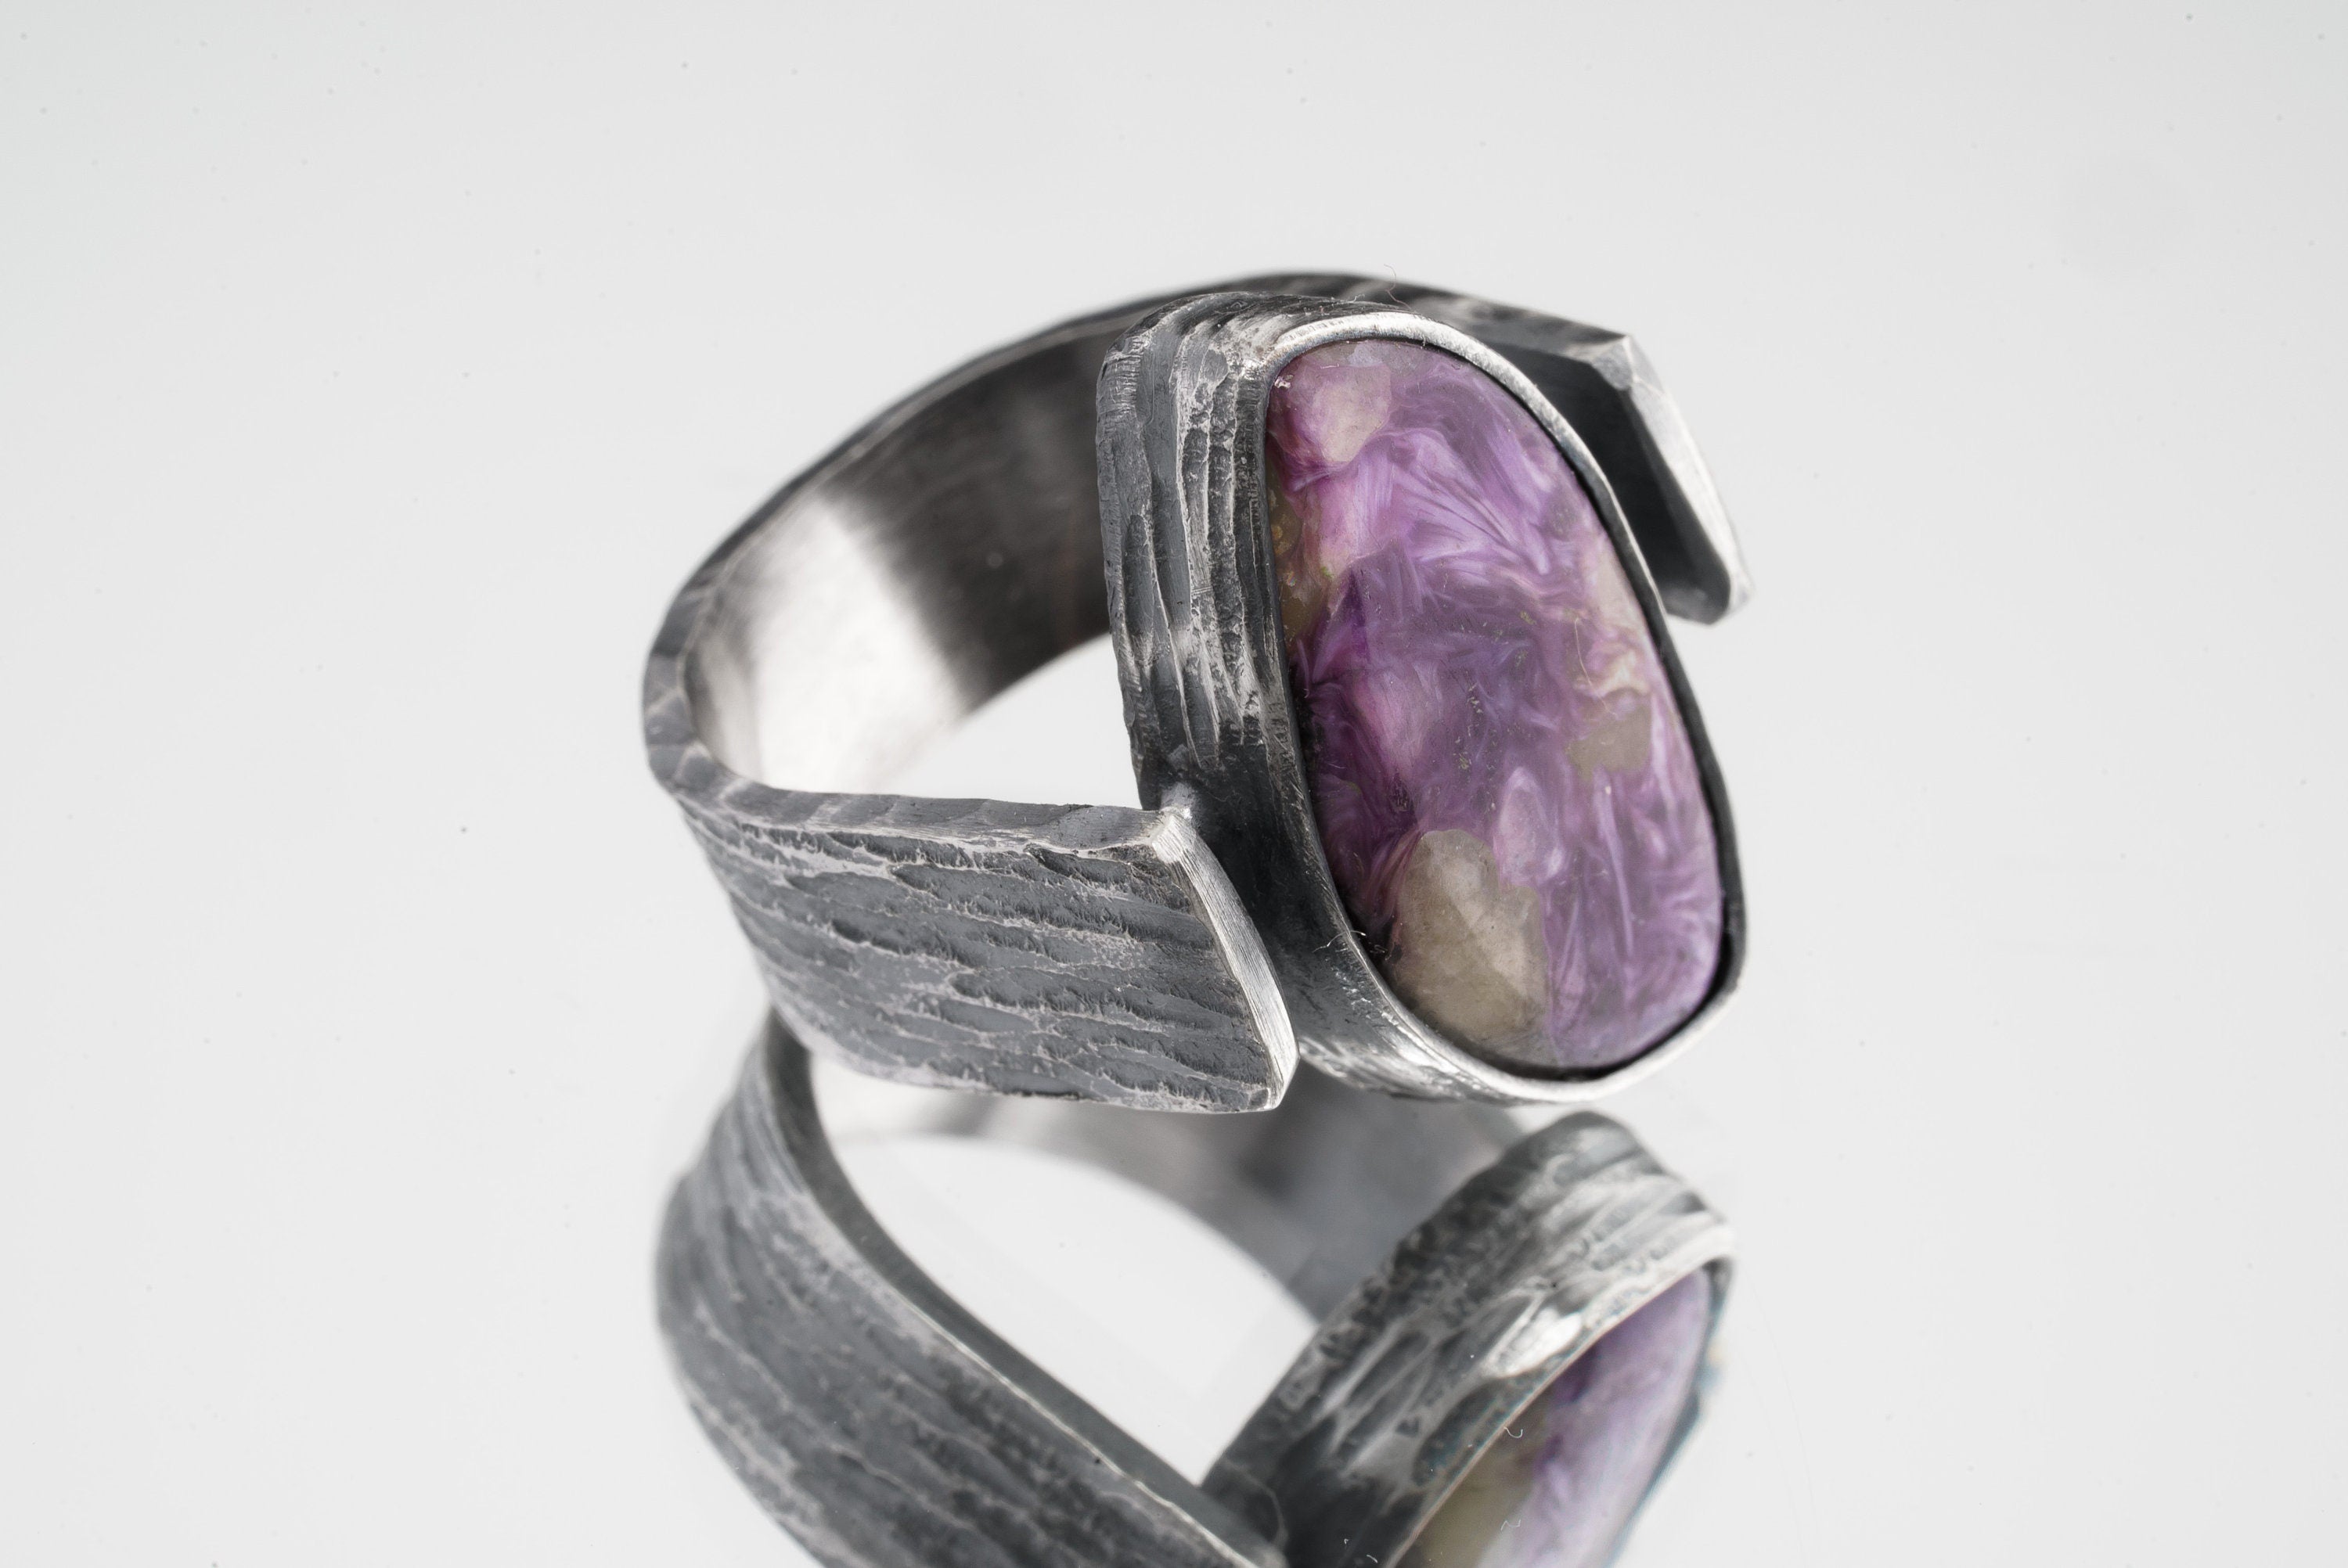 AAA Charoite Cabochon - Rustic Comfortable Crystal Ring - Size 7 1/2 US - 925 Sterling Silver - Abstract Textured & Oxidised